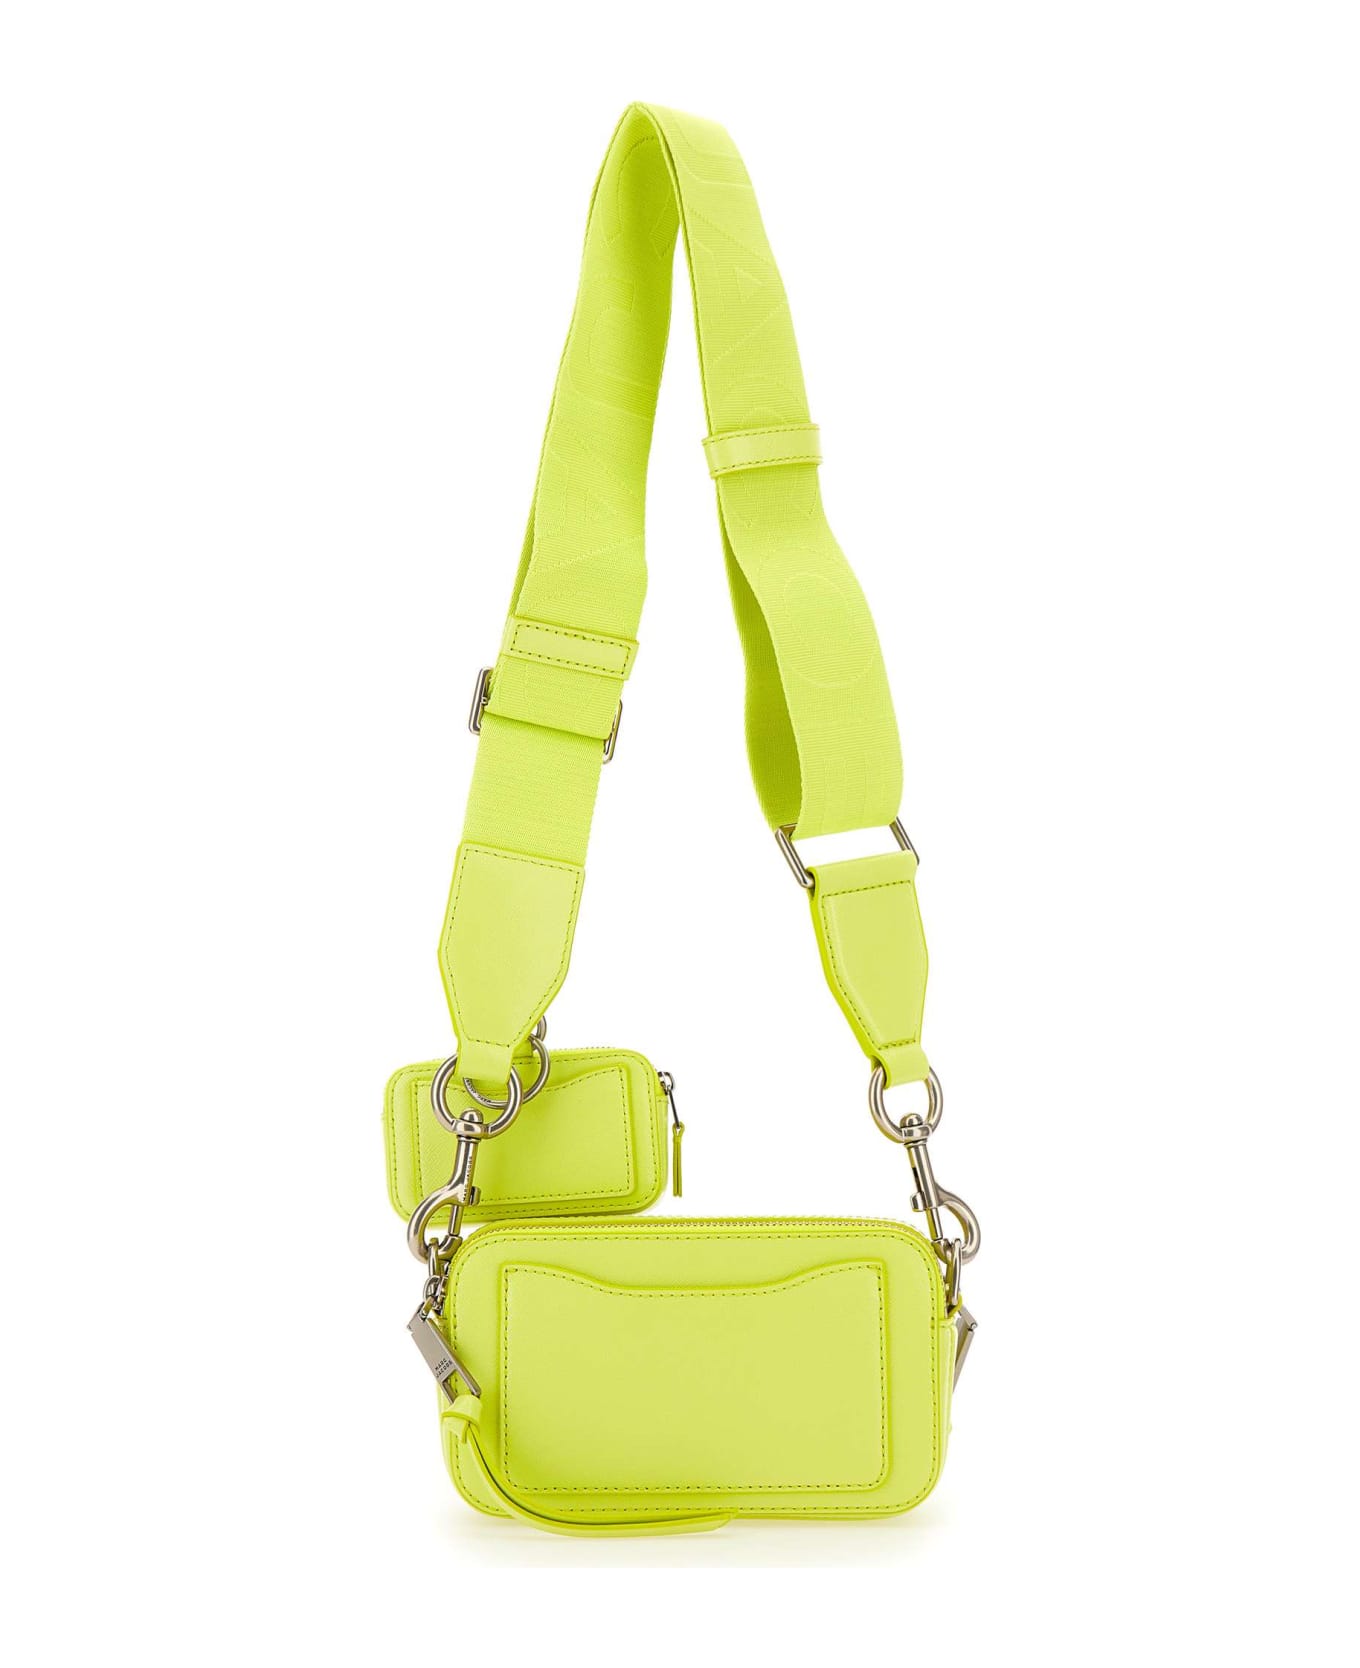 Marc Jacobs "the Utility Snapshot" Leather Bag - YELLOW ショルダーバッグ